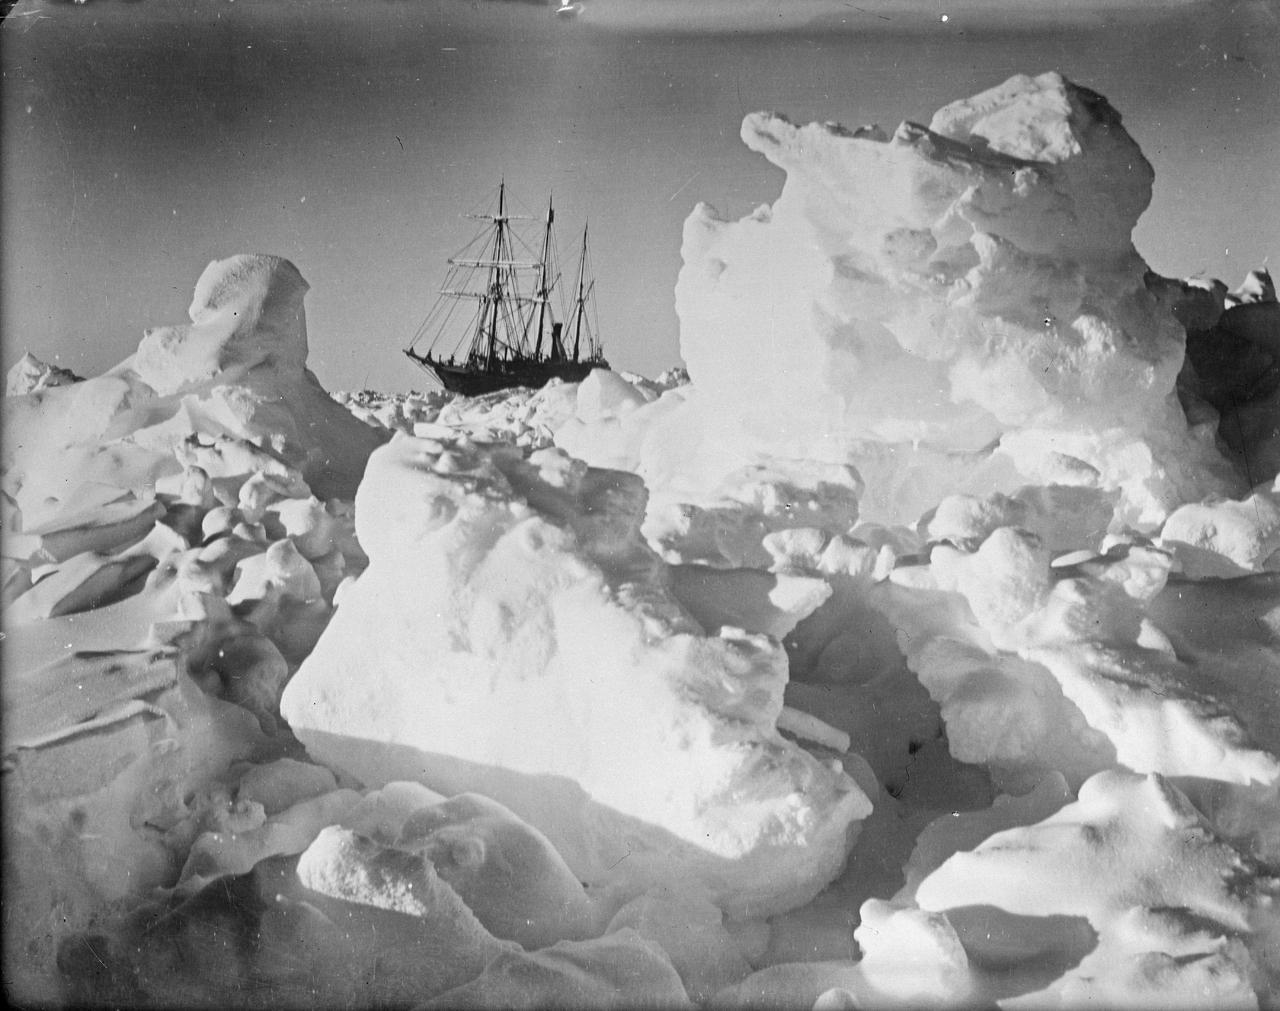 (Source of a boat in Antartica picture)